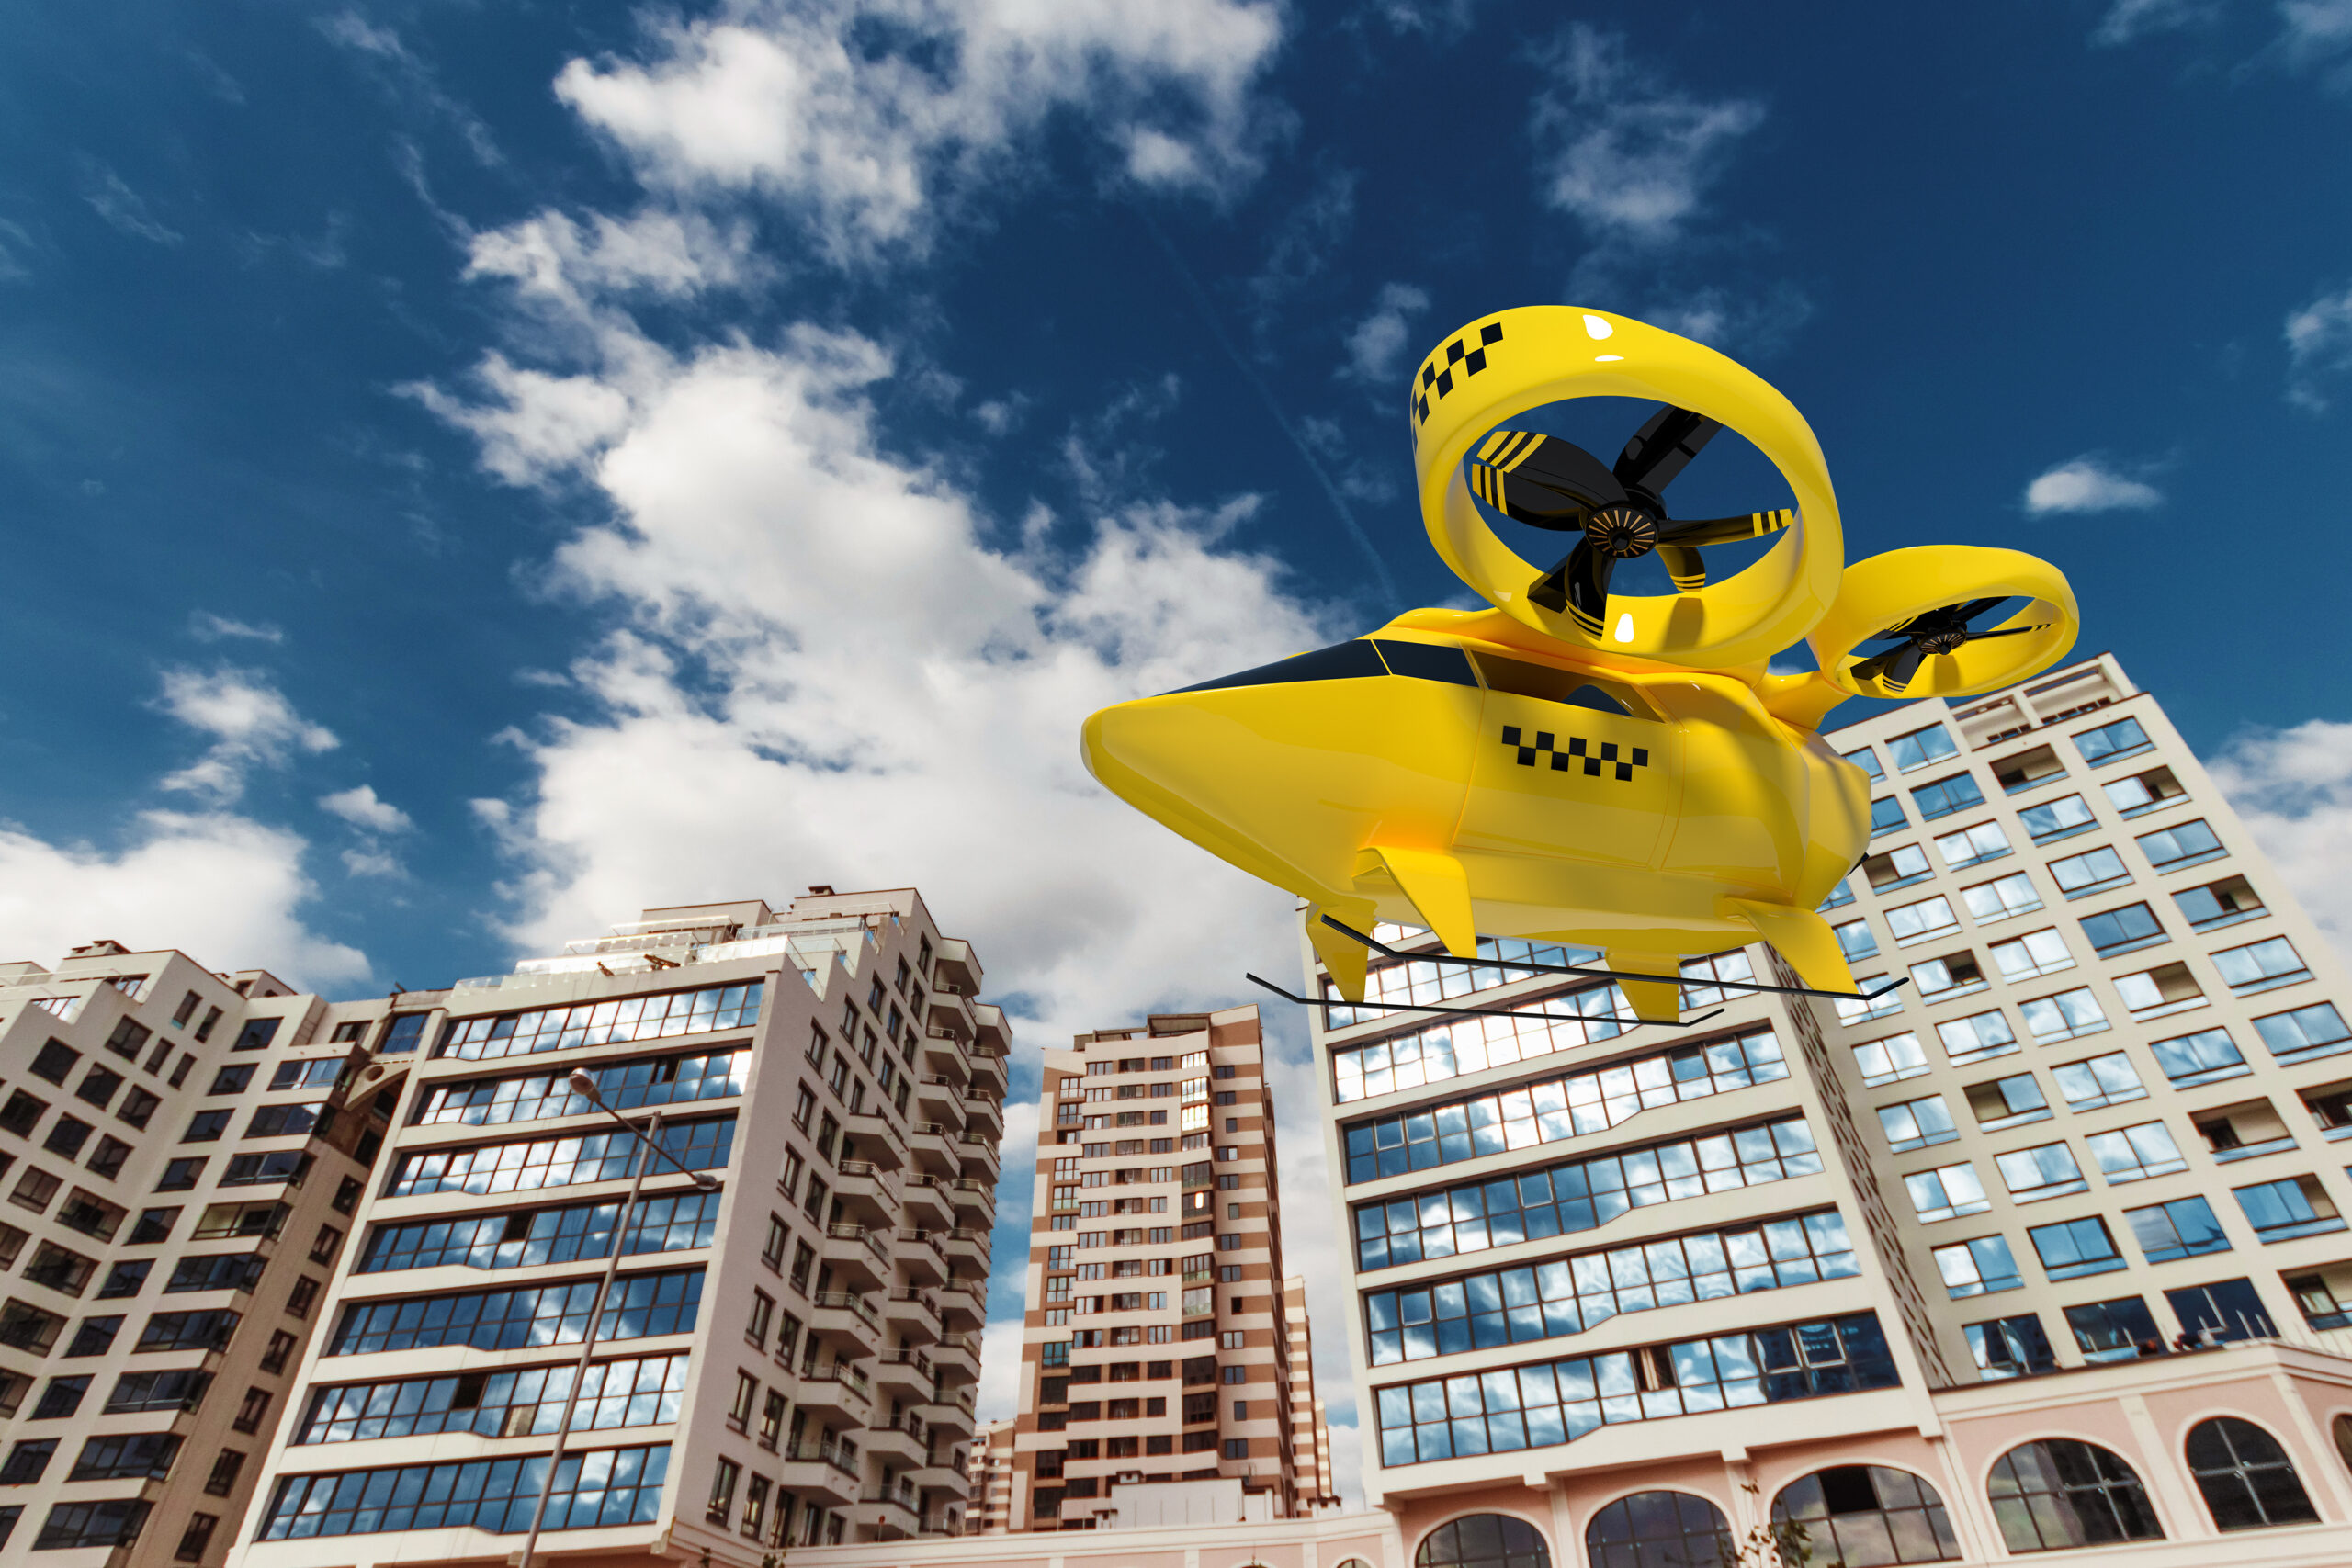 A yellow eVTOL air taxi flying in front of a city.